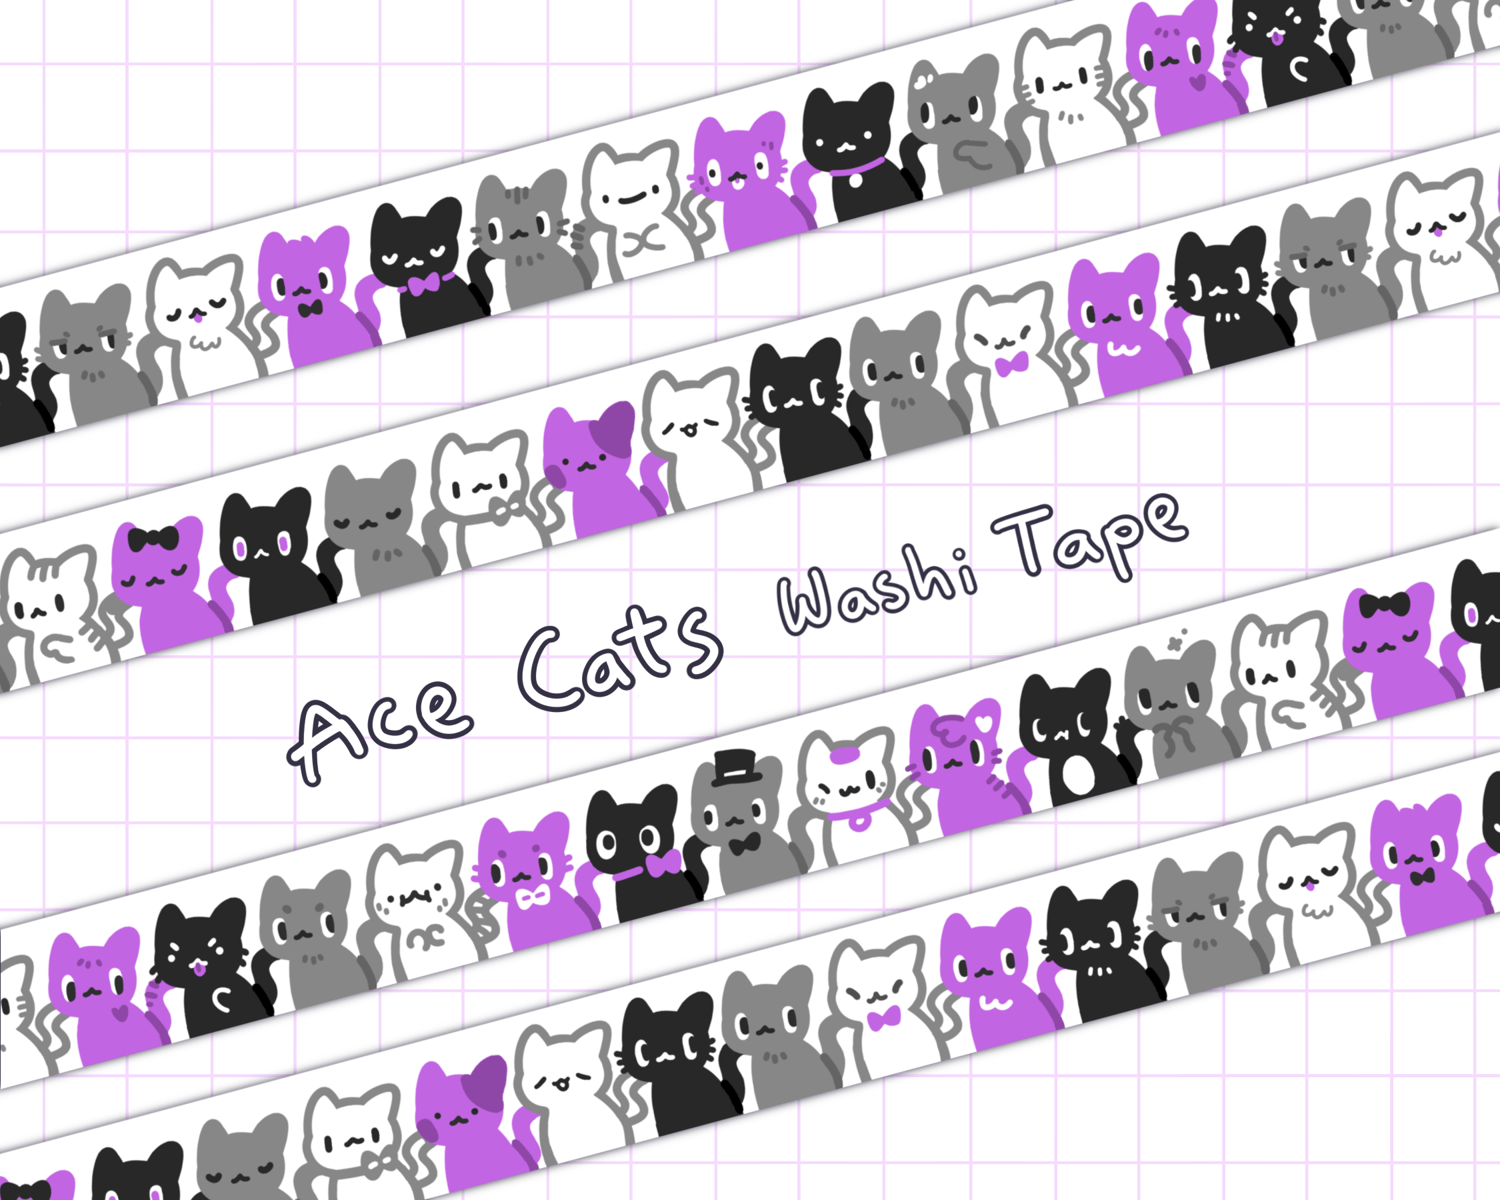 CAT WASHI TAPE NEW 2000-now FULL ROLL